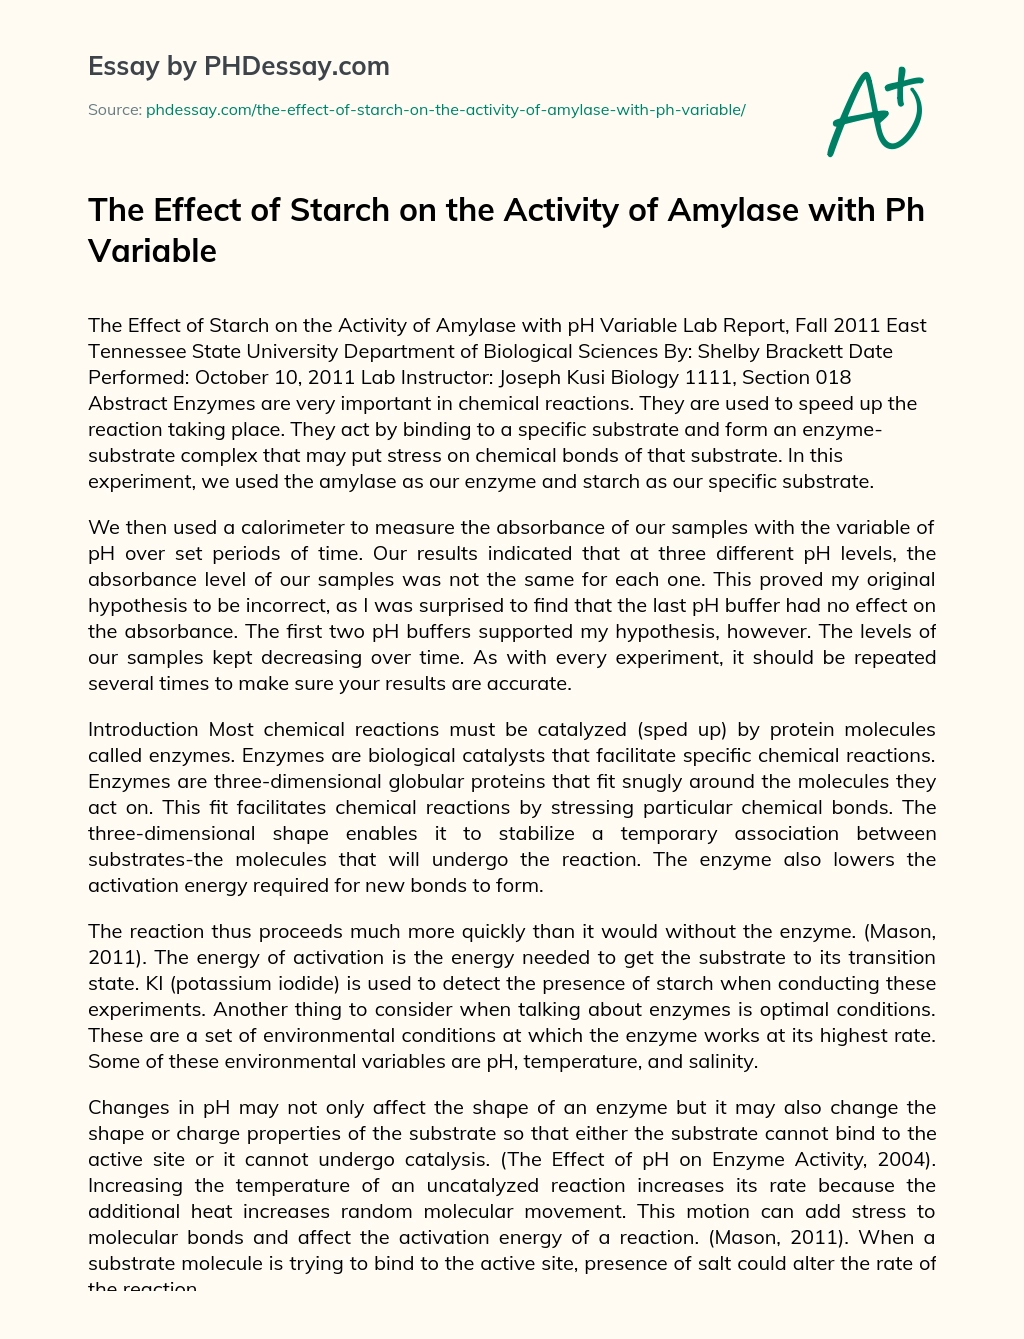 The Effect of Starch on the Activity of Amylase with Ph Variable essay